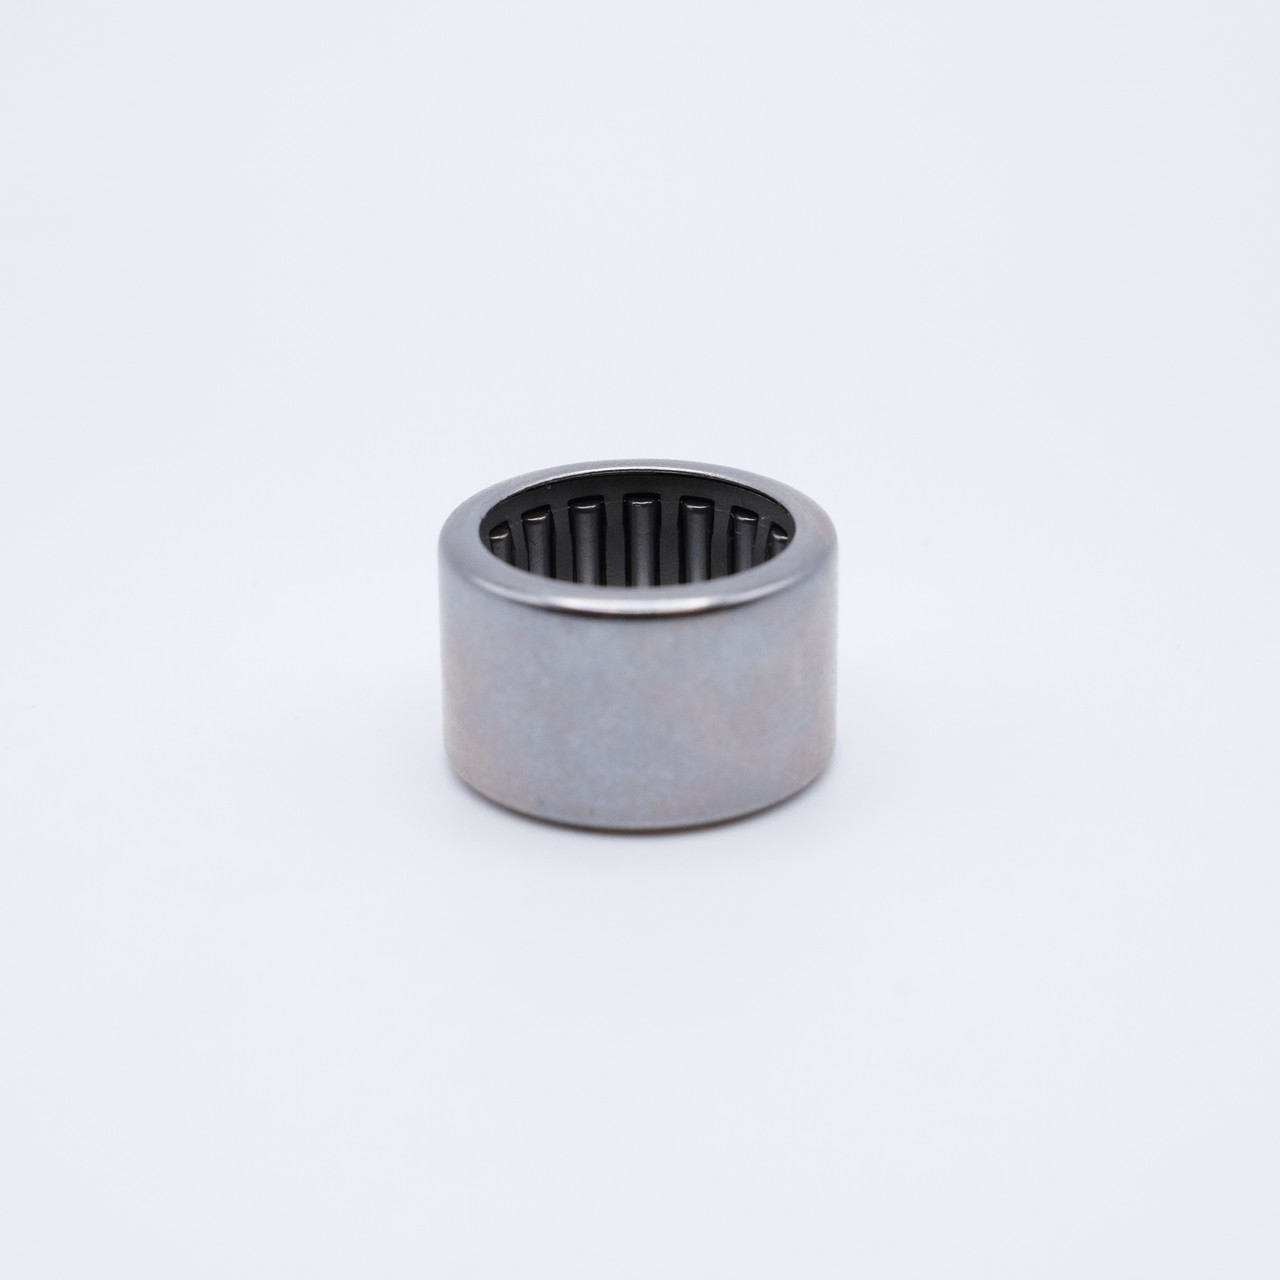 BA186 Needle Rollers Bearing 1-1/8x1-3/8x3/8 Top View